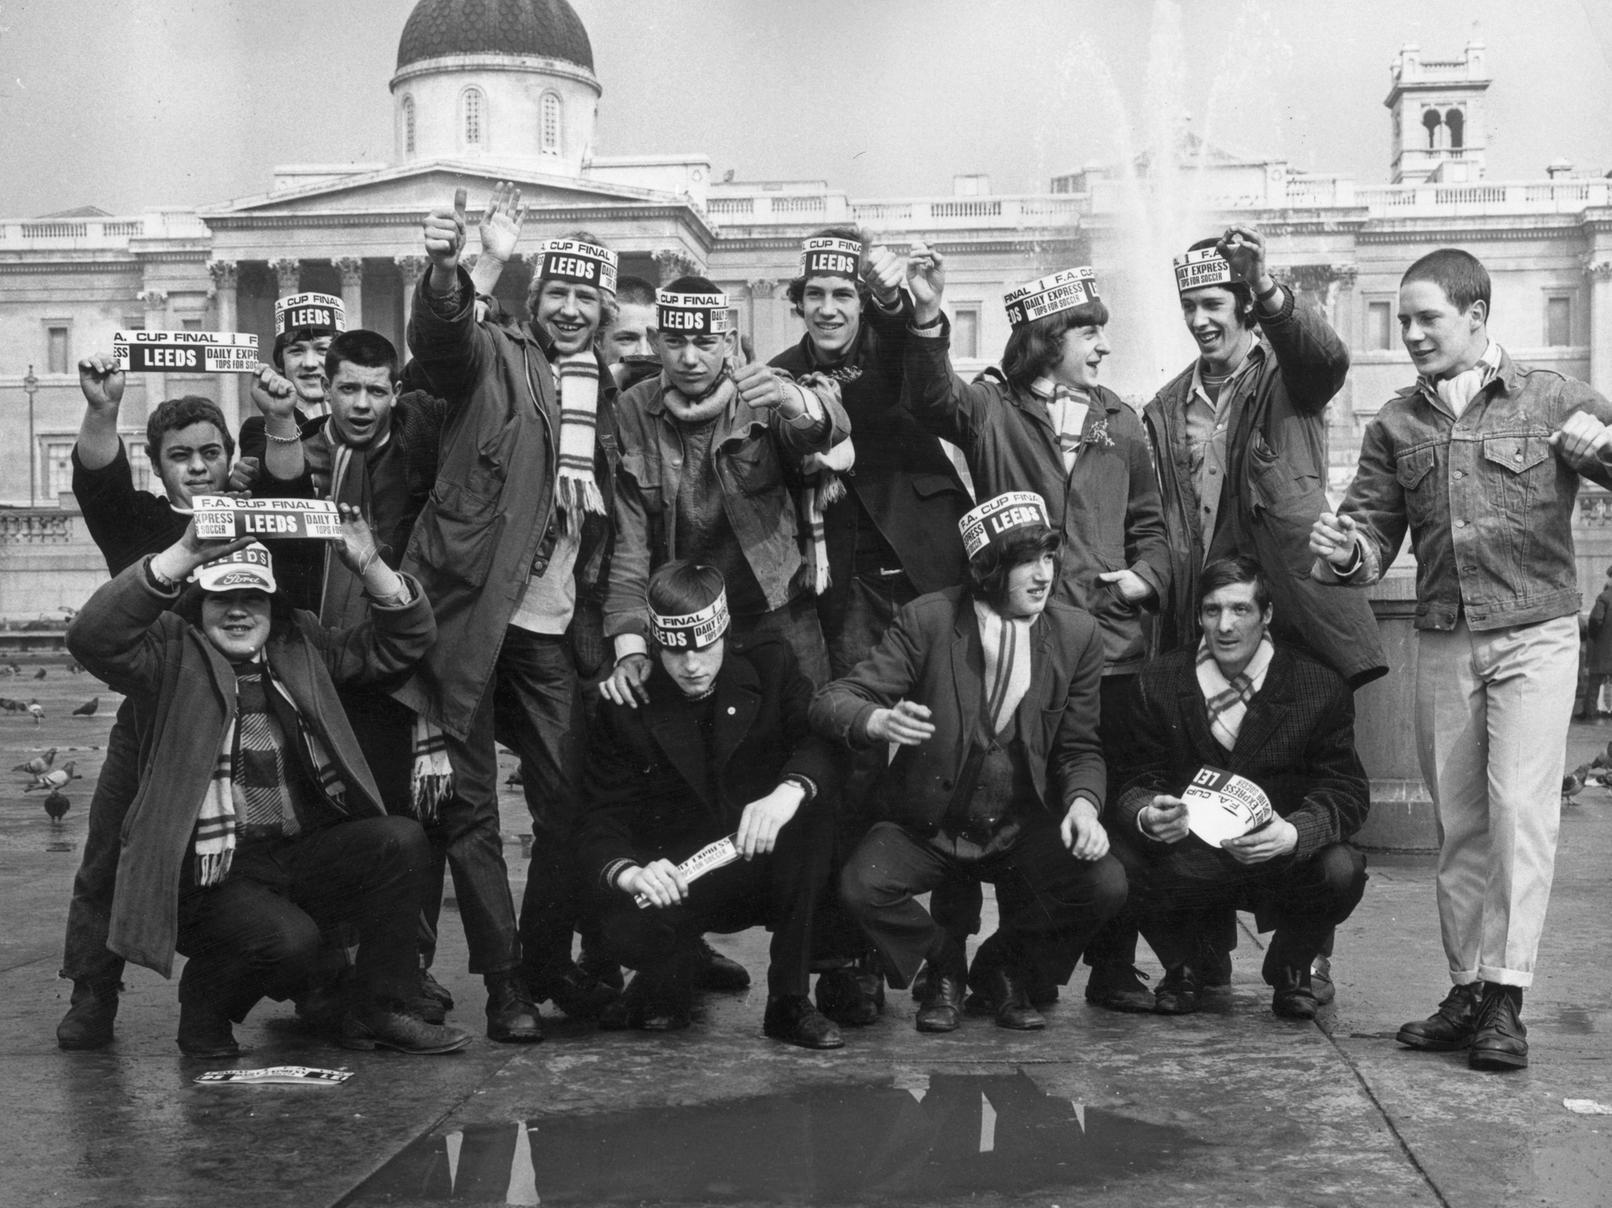 A group of Leeds United football fans in Trafalgar Square ahead of the FA Cup final.